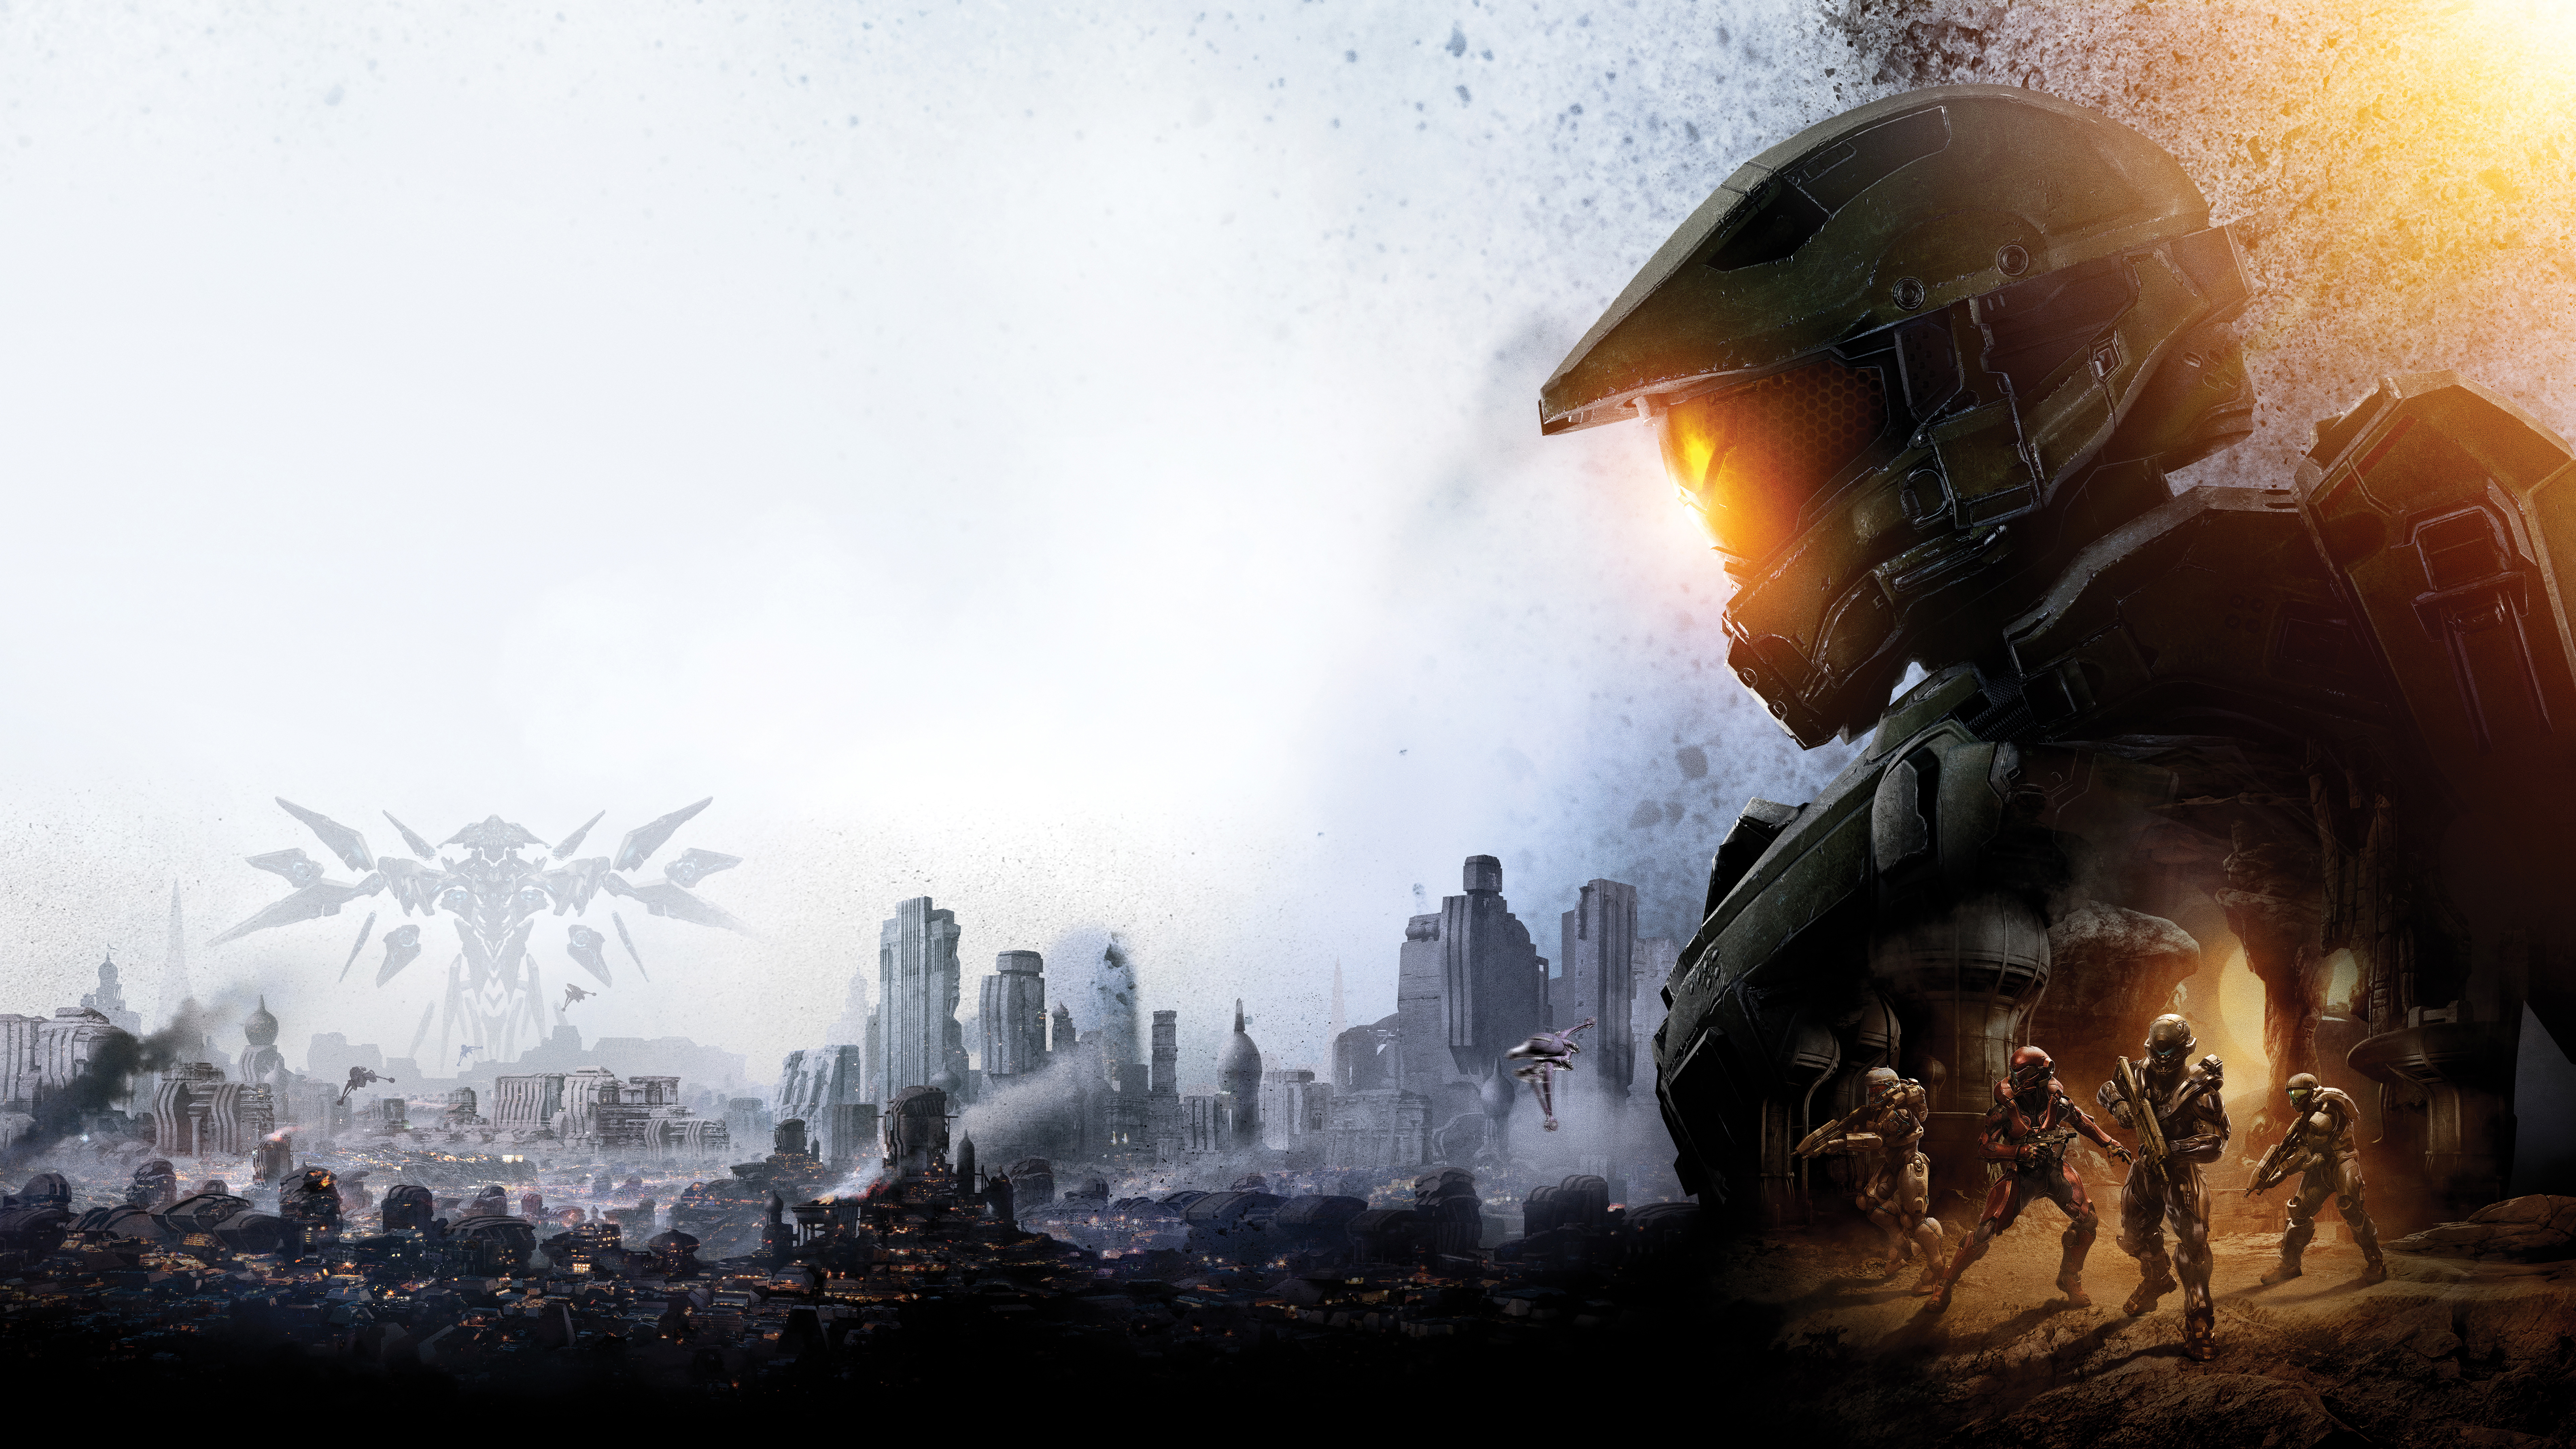 Master Chief Halo 5 8k, HD Games, 4k Wallpapers, Images ...